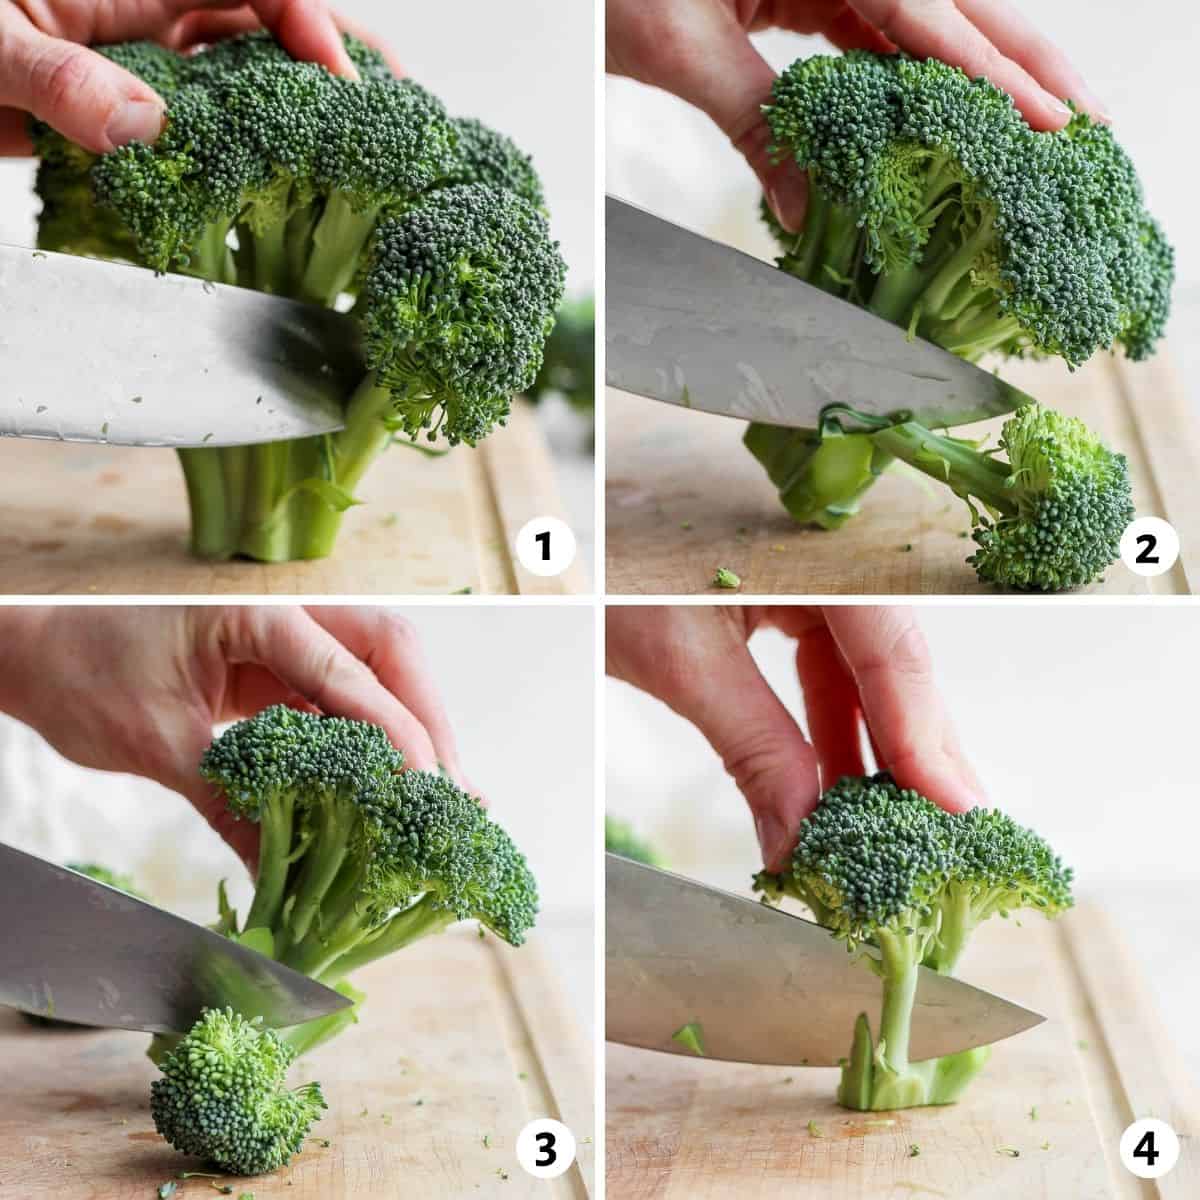 4 image collage to show how to cut broccoli